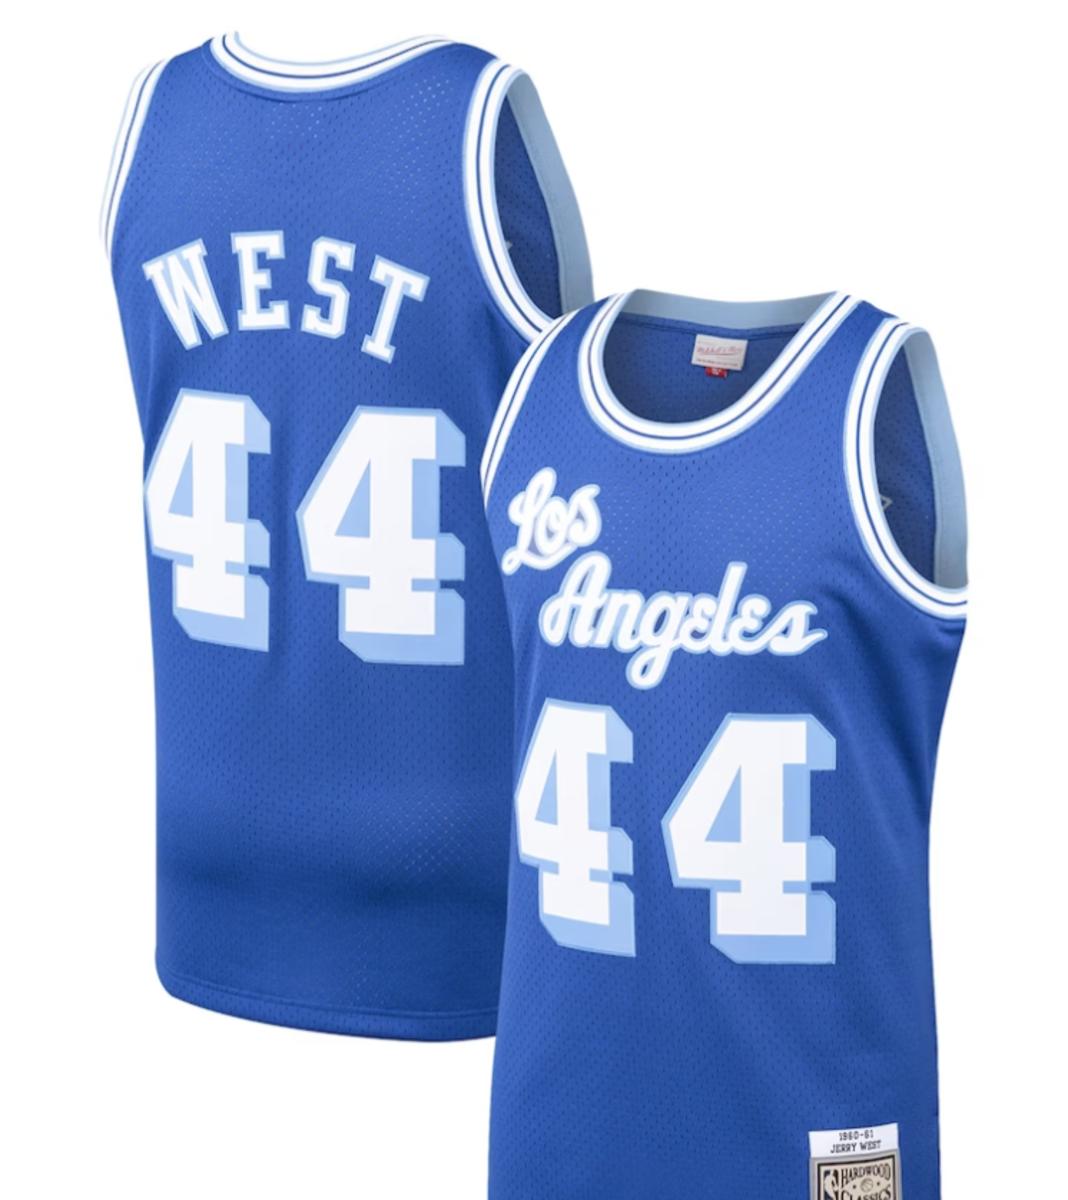 Jerry West Los Angeles Lakers Mitchell & Ness Hardwood Classics Swingman Jersey - $98.54 with code: TREAT